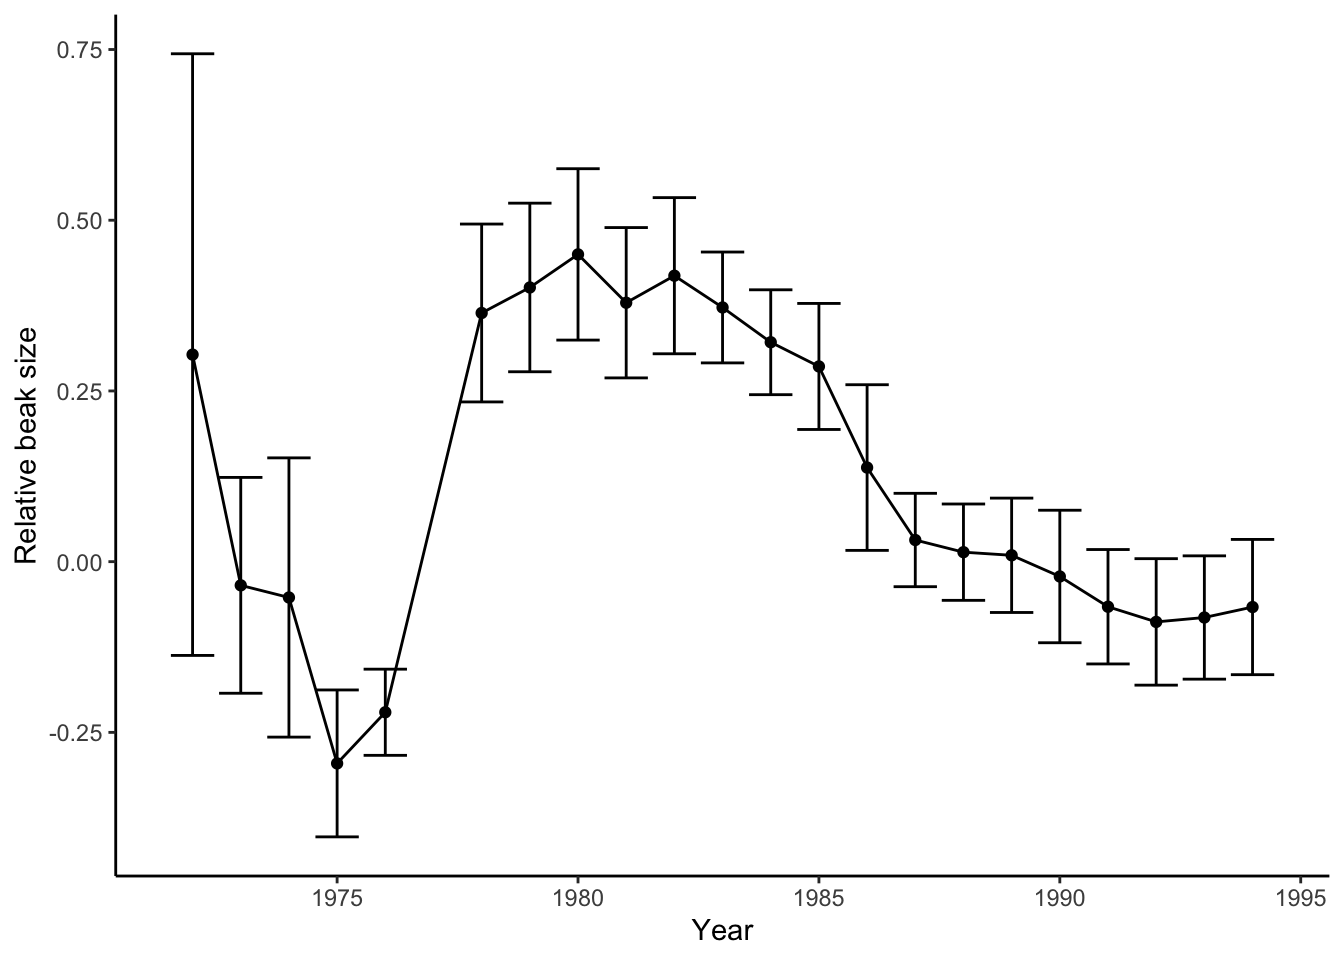 Variation of relative beak size in *G. fortis* on Daphne Major Island  from 1972-1995. Positive numbers indicate larger beaks and negative number represent smaller beaks.